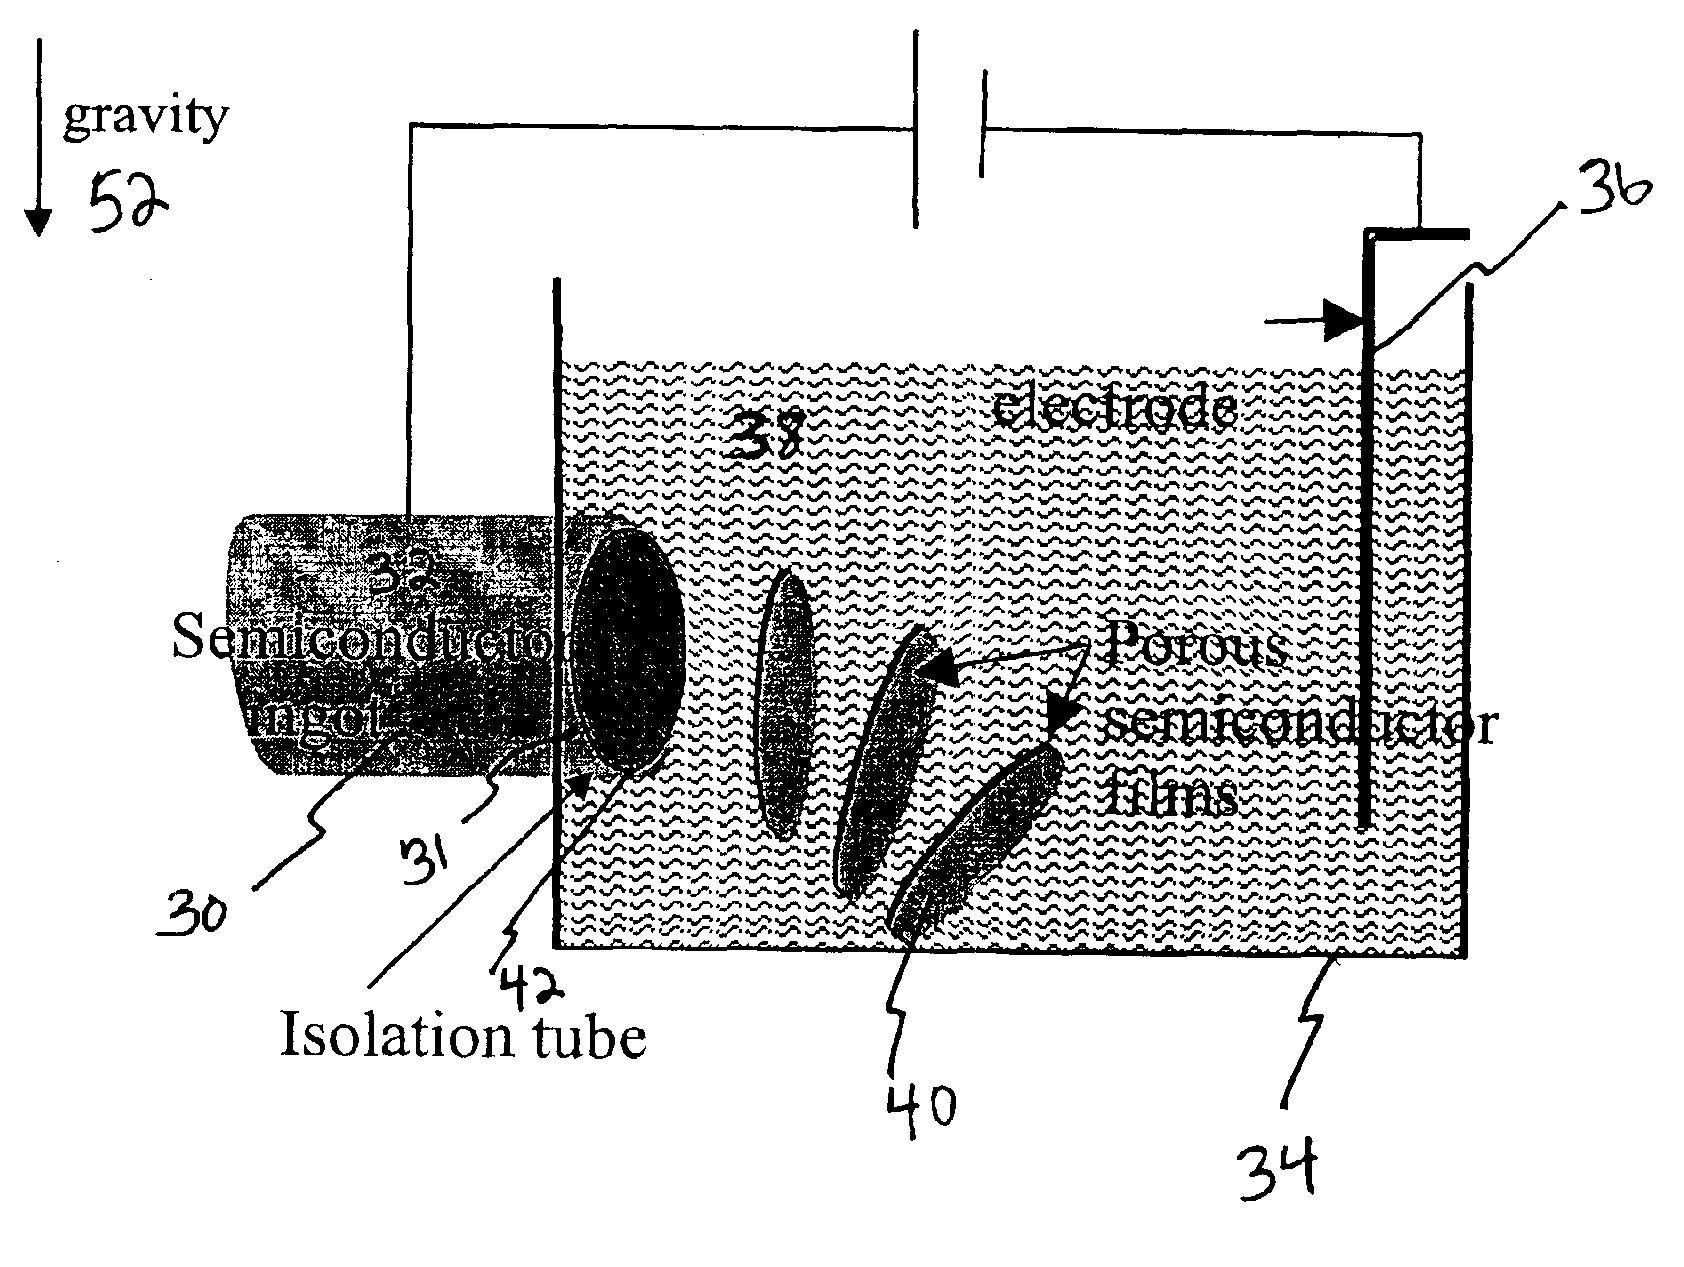 Method and apparatus for continuous formation and lift-off of porous silicon layers